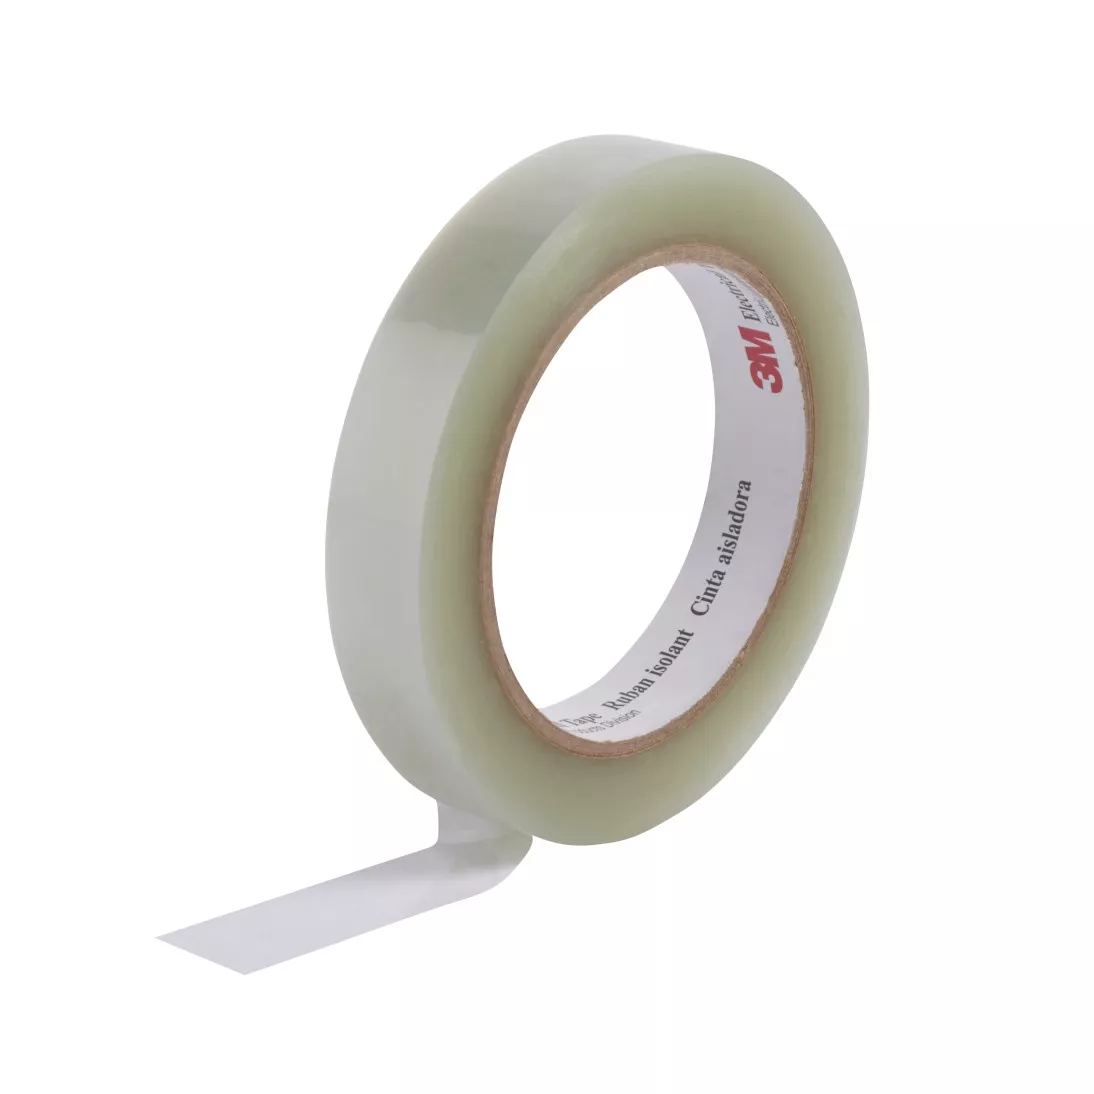 3M™ Polyester Film Electrical Tape 5, 6 in x 72 yd, 3 in core